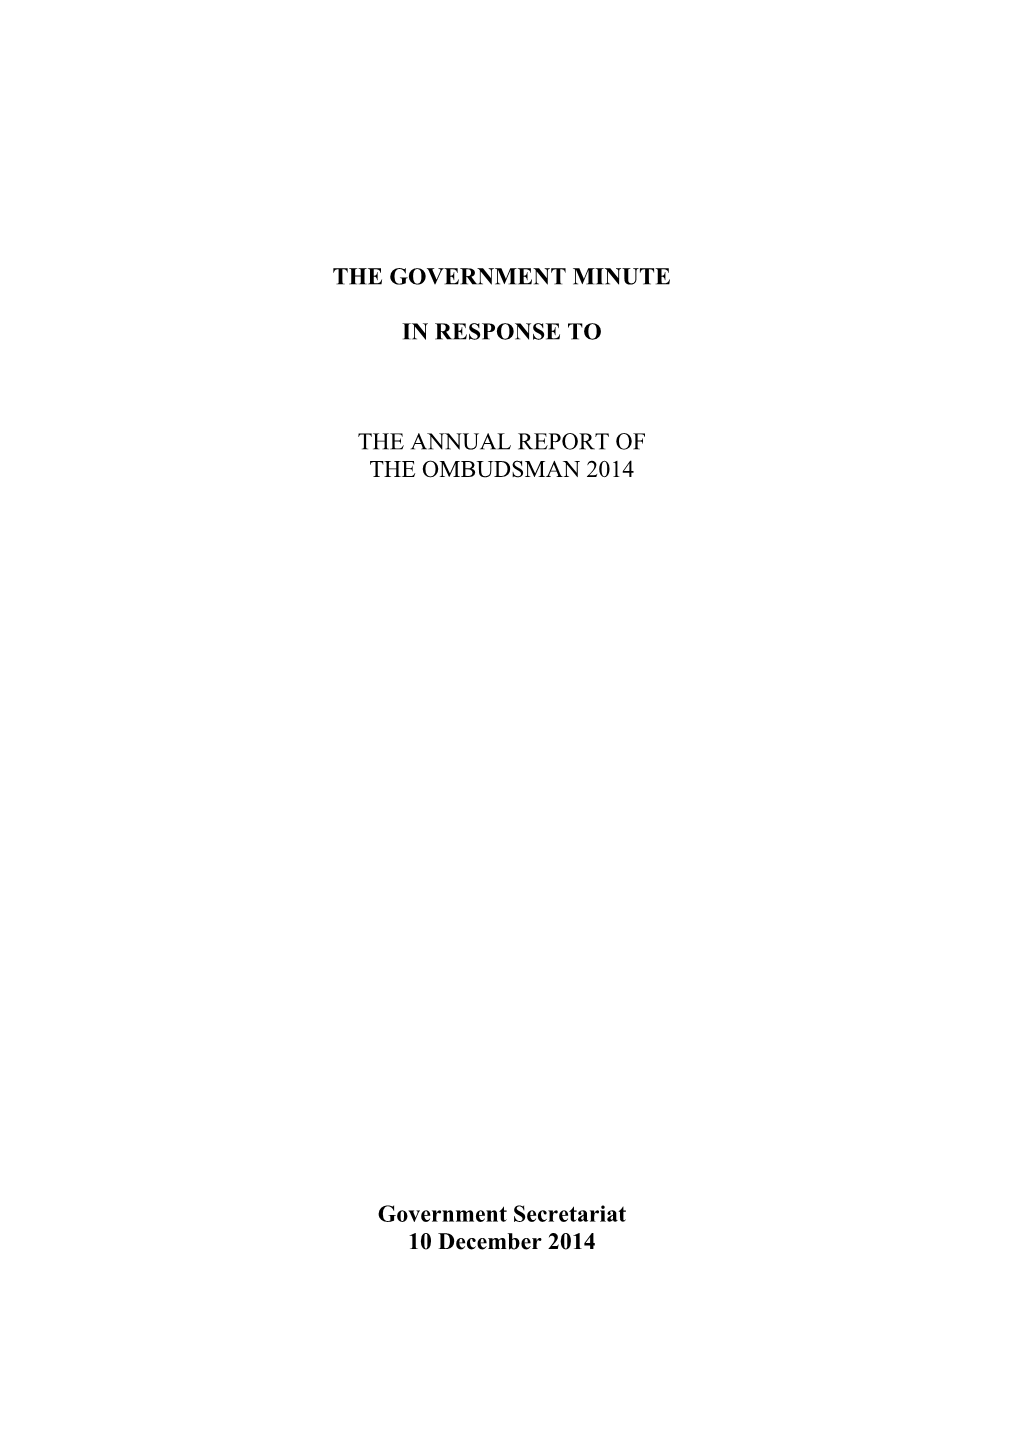 The Government Minute in Response to the Annual Report of the Ombudsman 2014